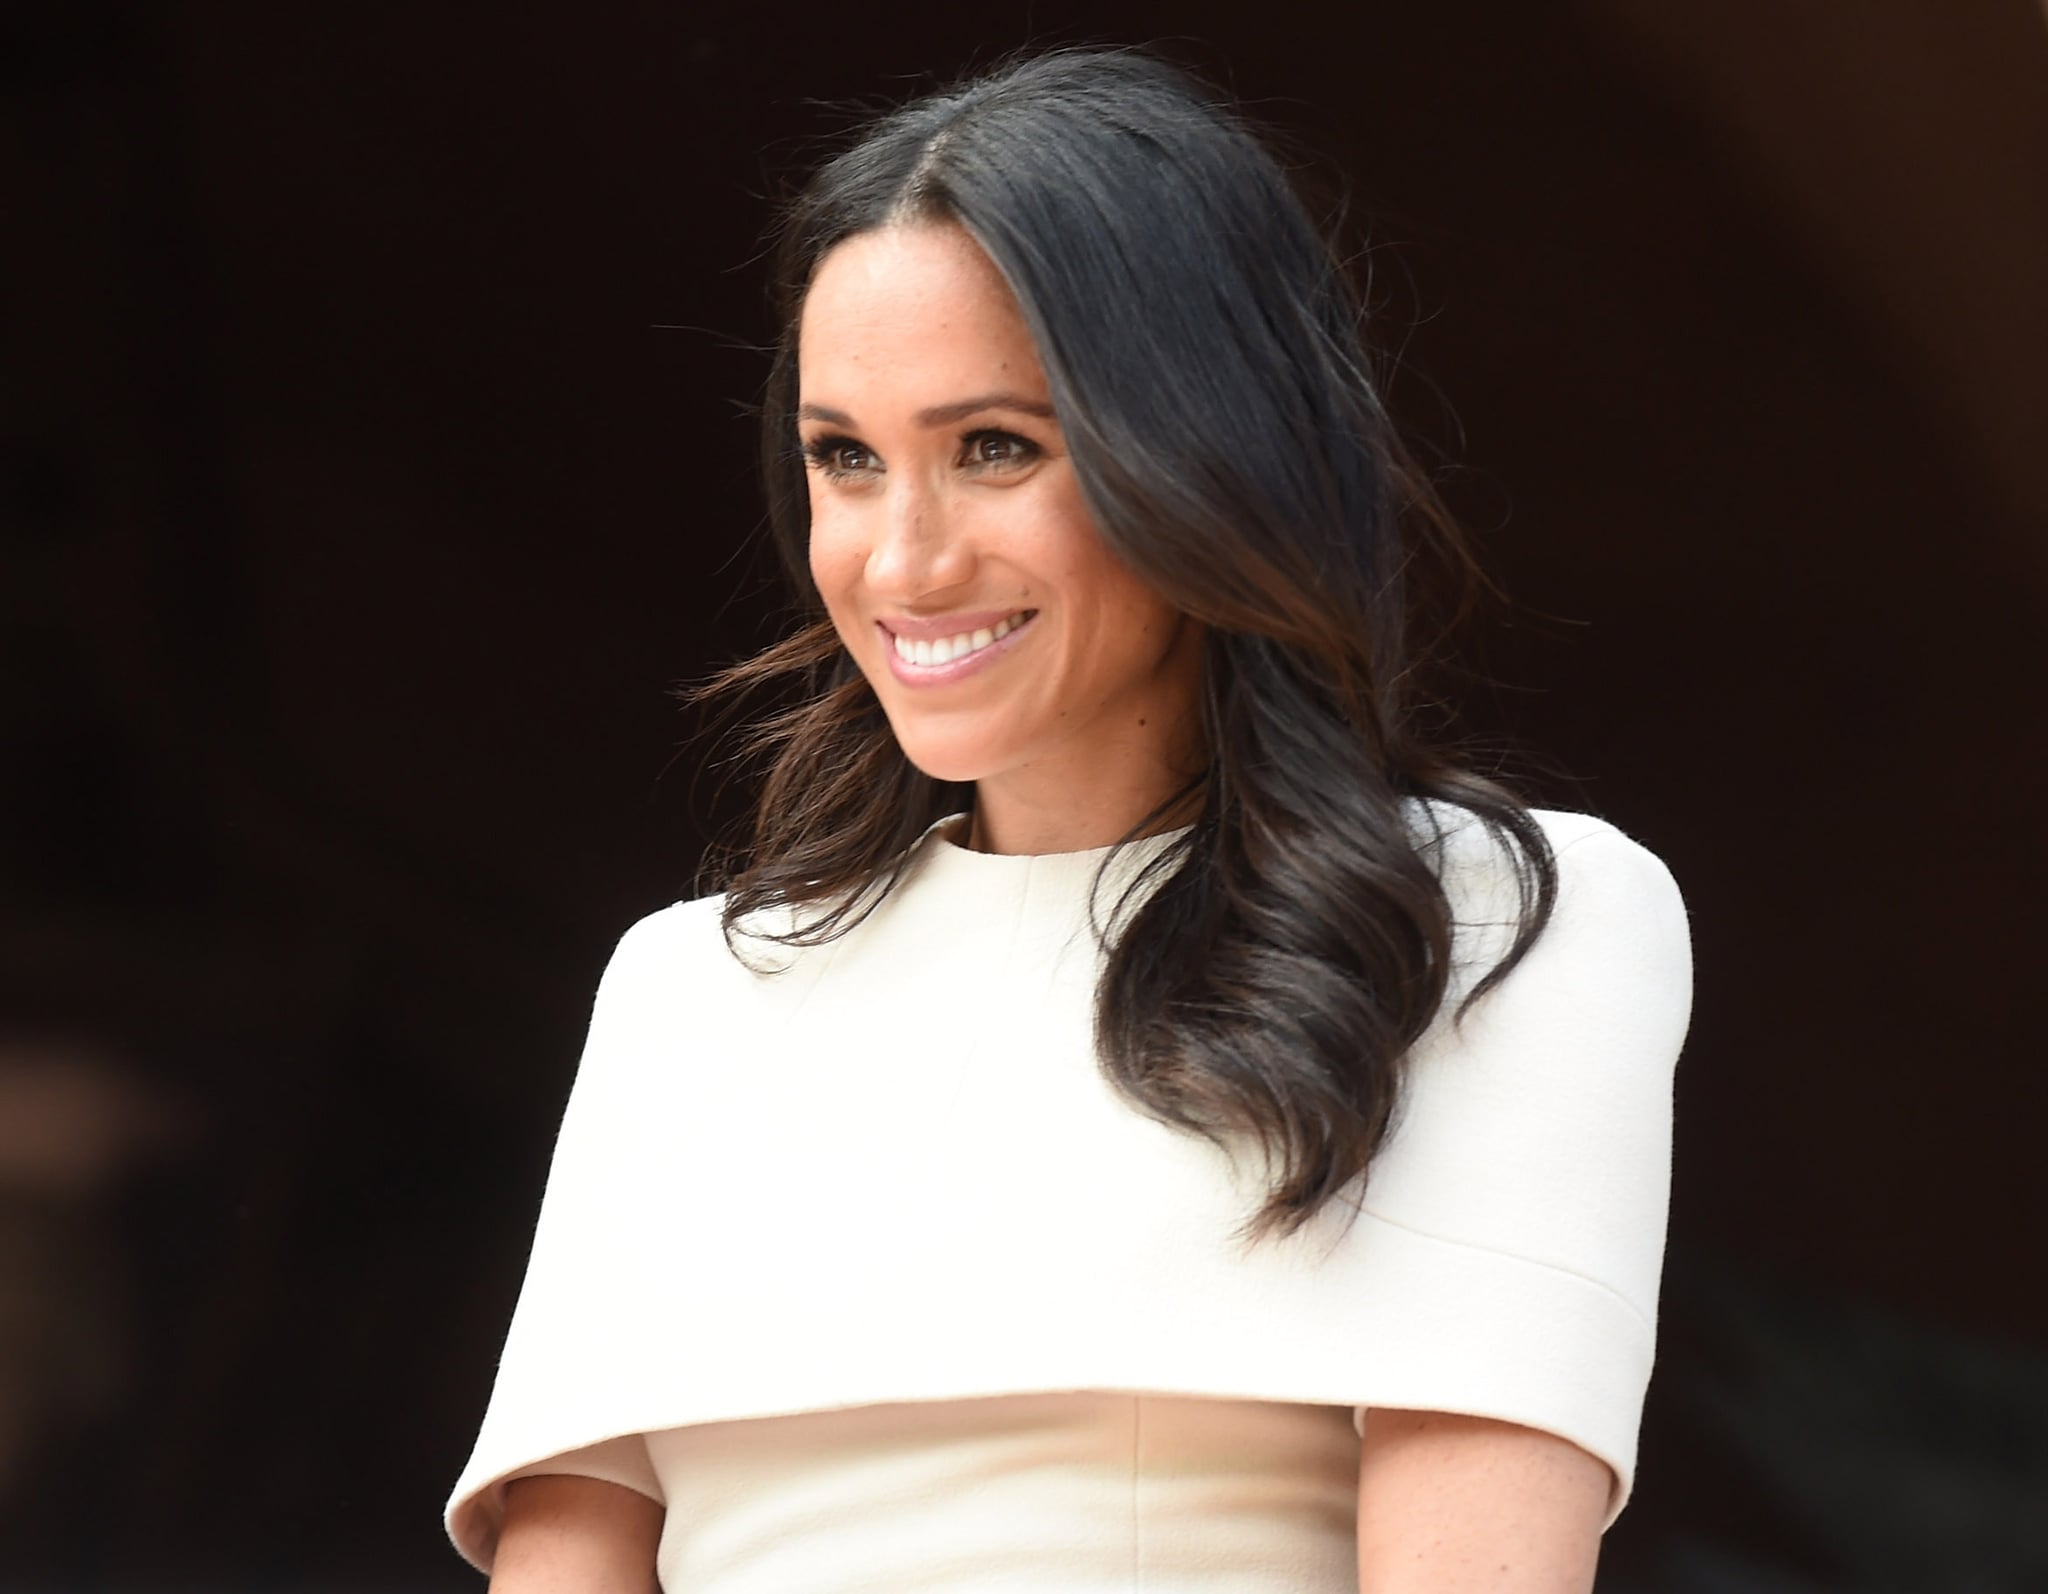 CHESTER, ENGLAND - JUNE 14:  Meghan, Duchess of Sussex and Queen Elizabeth II (not pictured) visit Chester Town Hall on June 14, 2018 in Chester, England. Meghan Markle married Prince Harry last month to become The Duchess of Sussex and this is her first engagement with the Queen. During the visit the pair will open a road bridge in Widnes and visit The Storyhouse and Town Hall in Chester.  (Photo by Eddie Mulholland/WPA Pool/Getty Images)